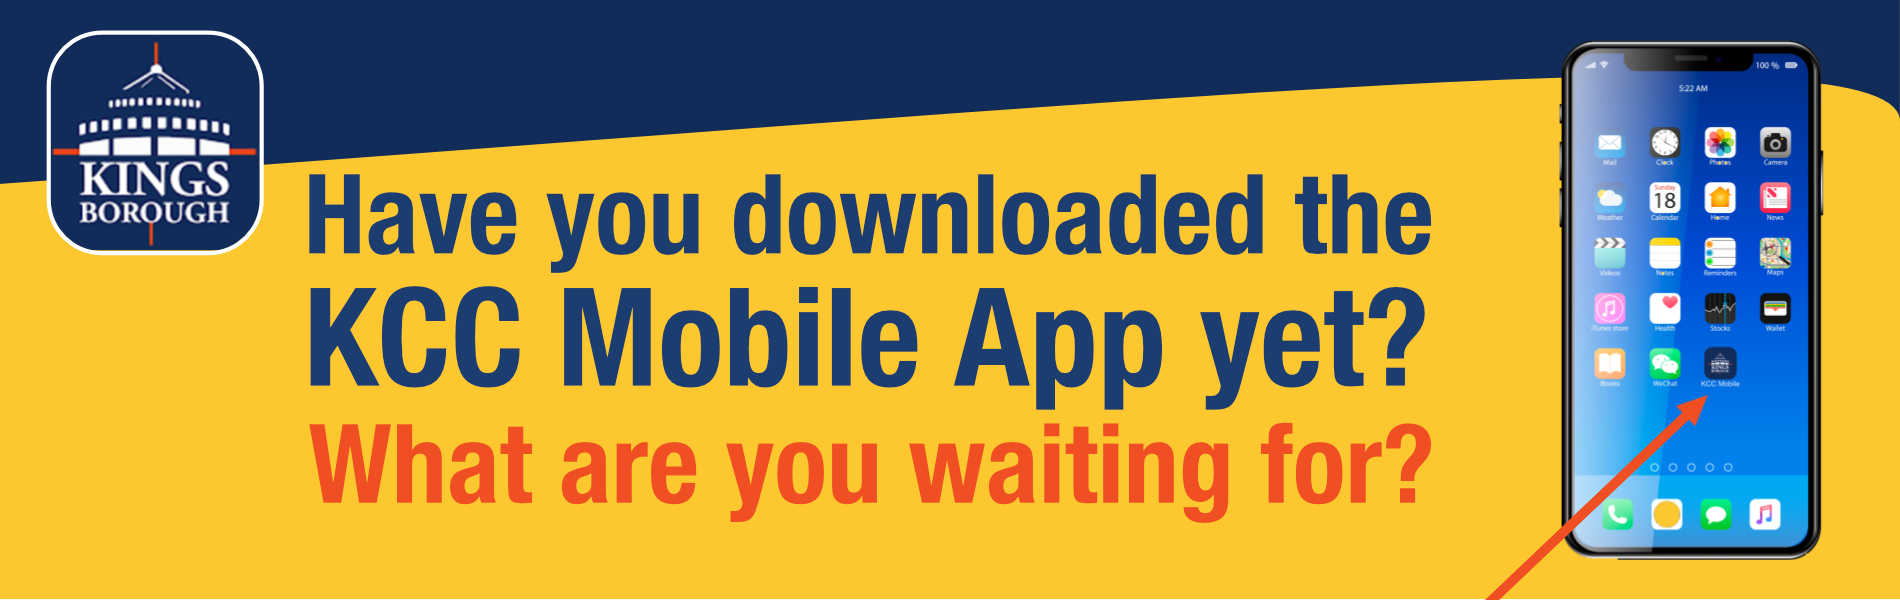 Have you downloaded the KCC Mobile App yet?